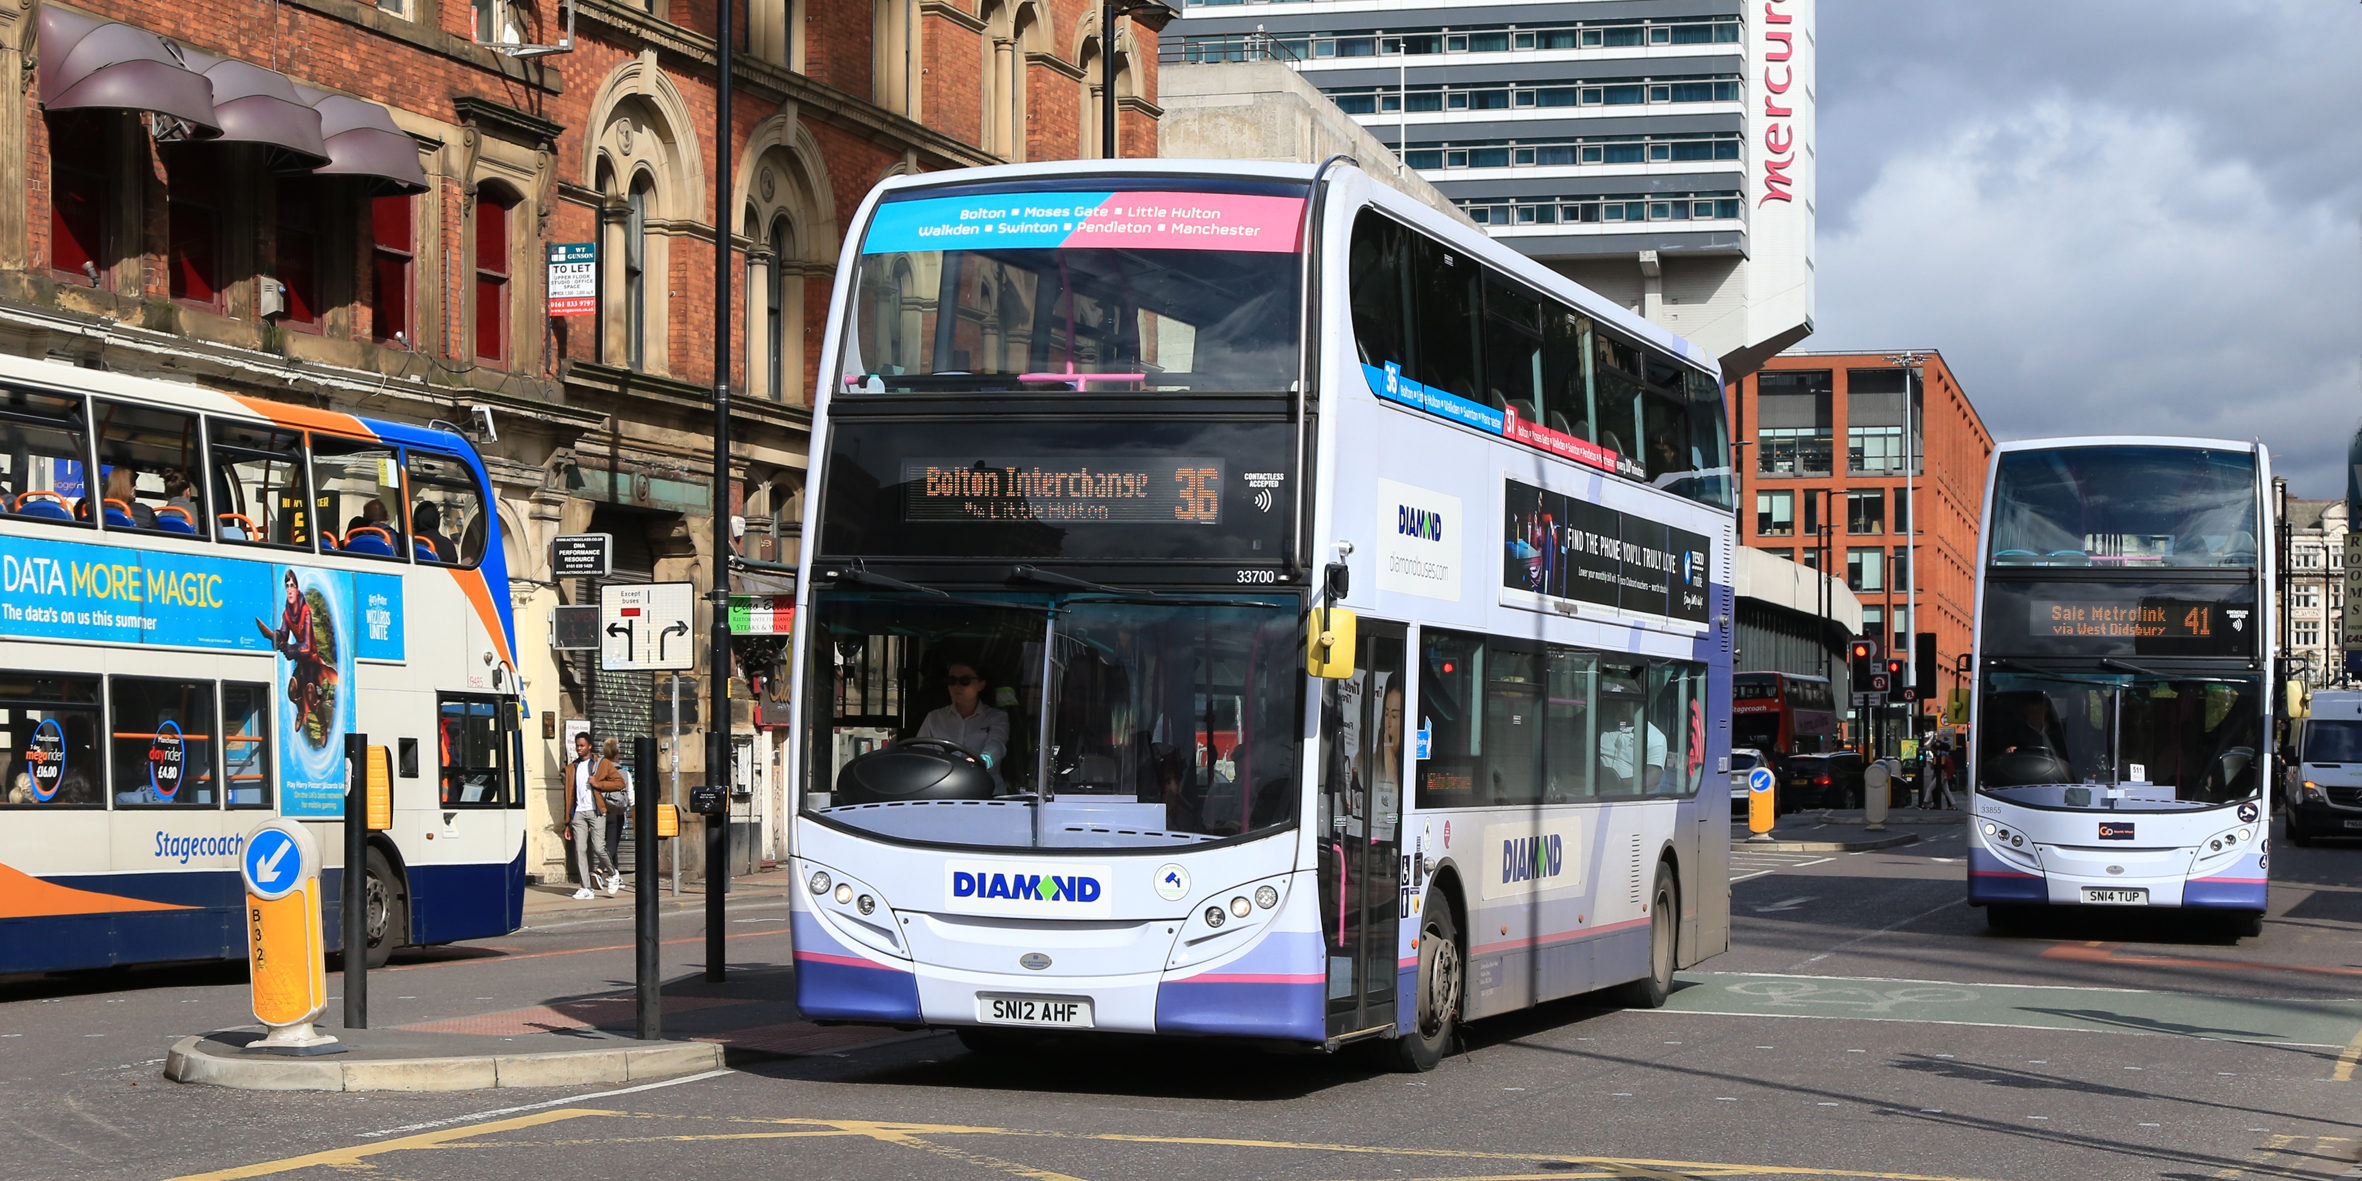 OneBus warns against Manchester franchising